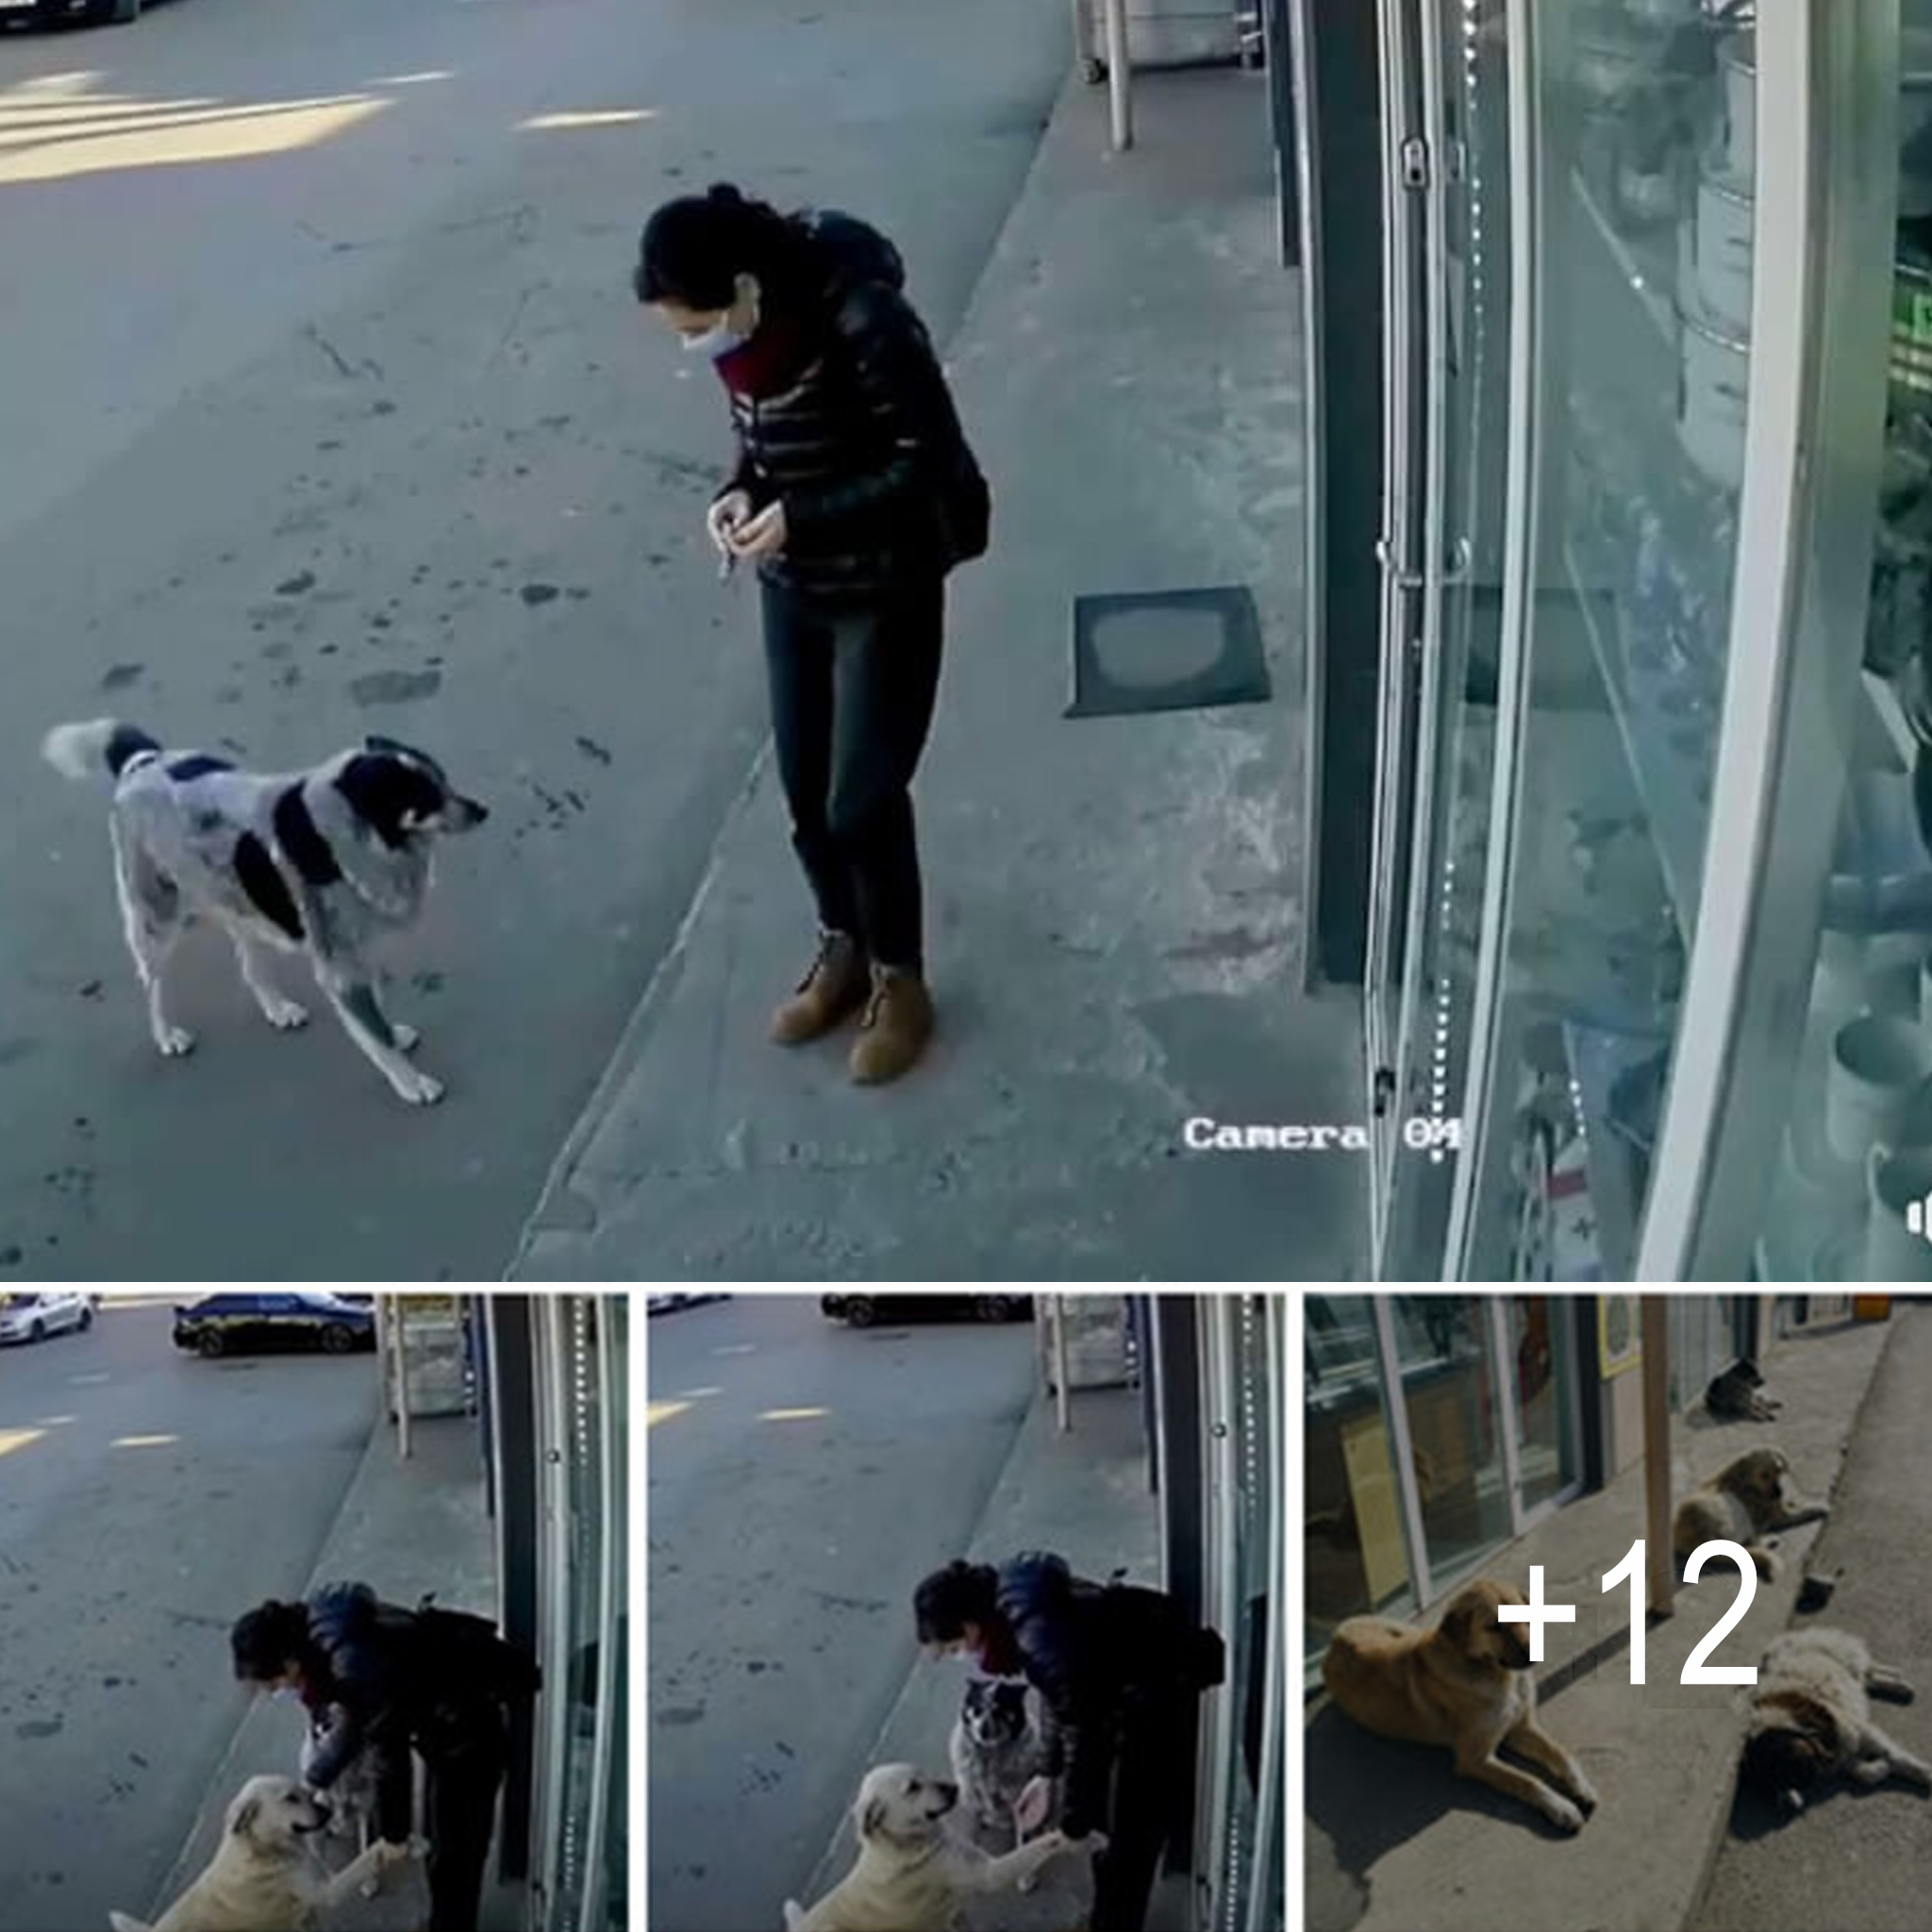 Touching Compassion: Office CCTV Captures Woman’s Kind Pause to Remind Stray Dogs of Their Inherent Worth